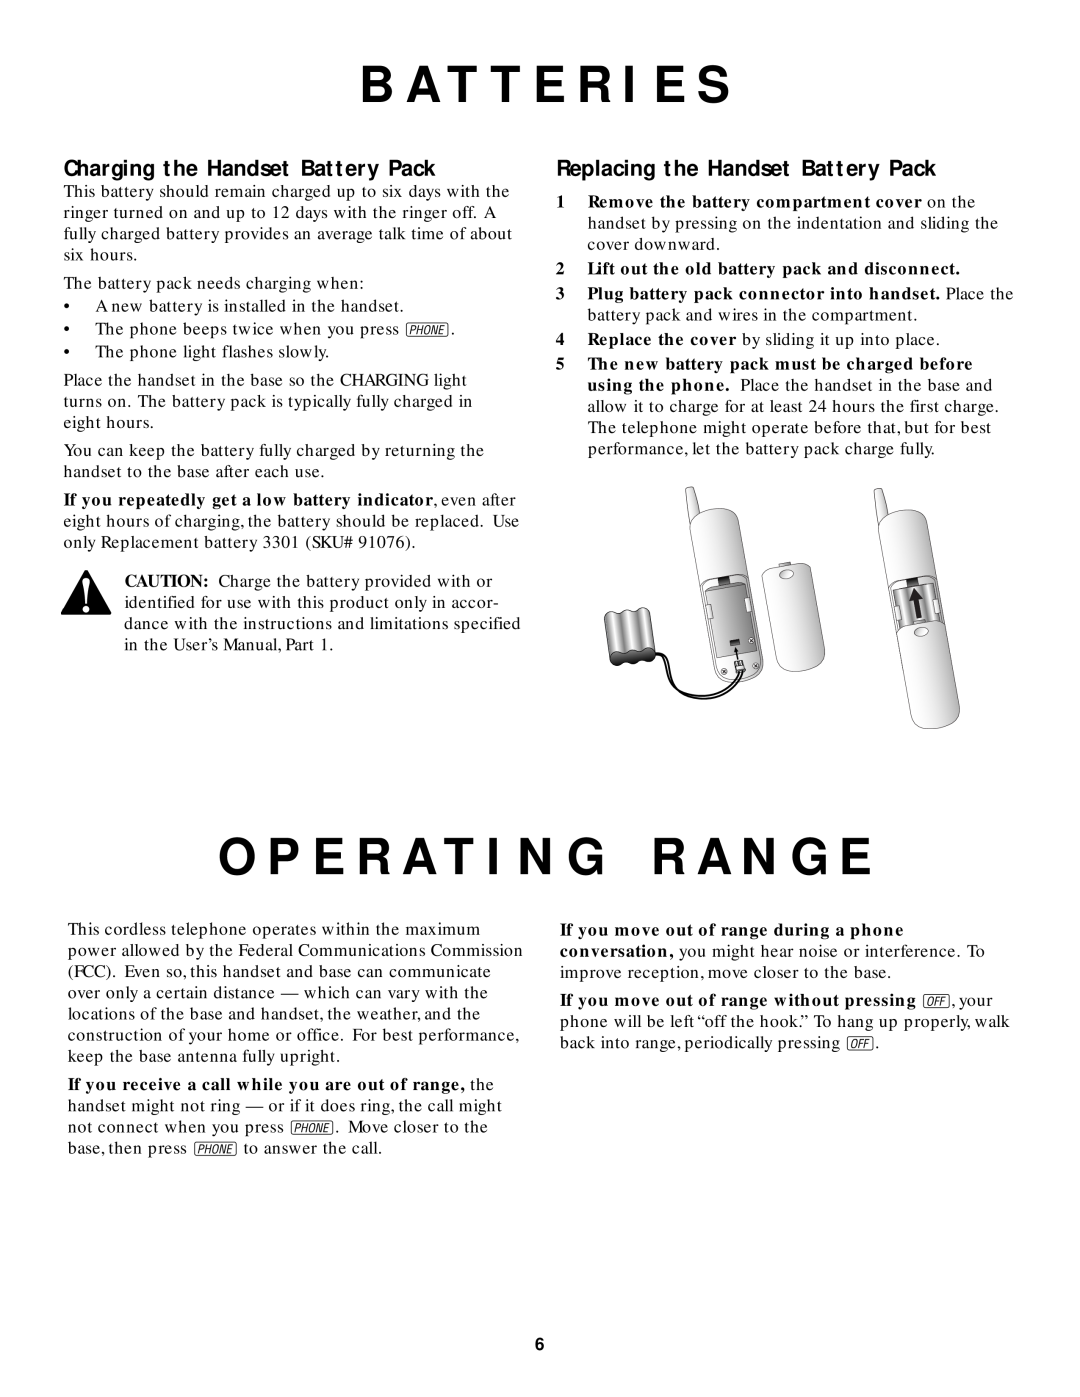 AT&T 9210 user manual B A T T E R I E S, O P E R A T I N G R A N G E, Charging the Handset Battery Pack 